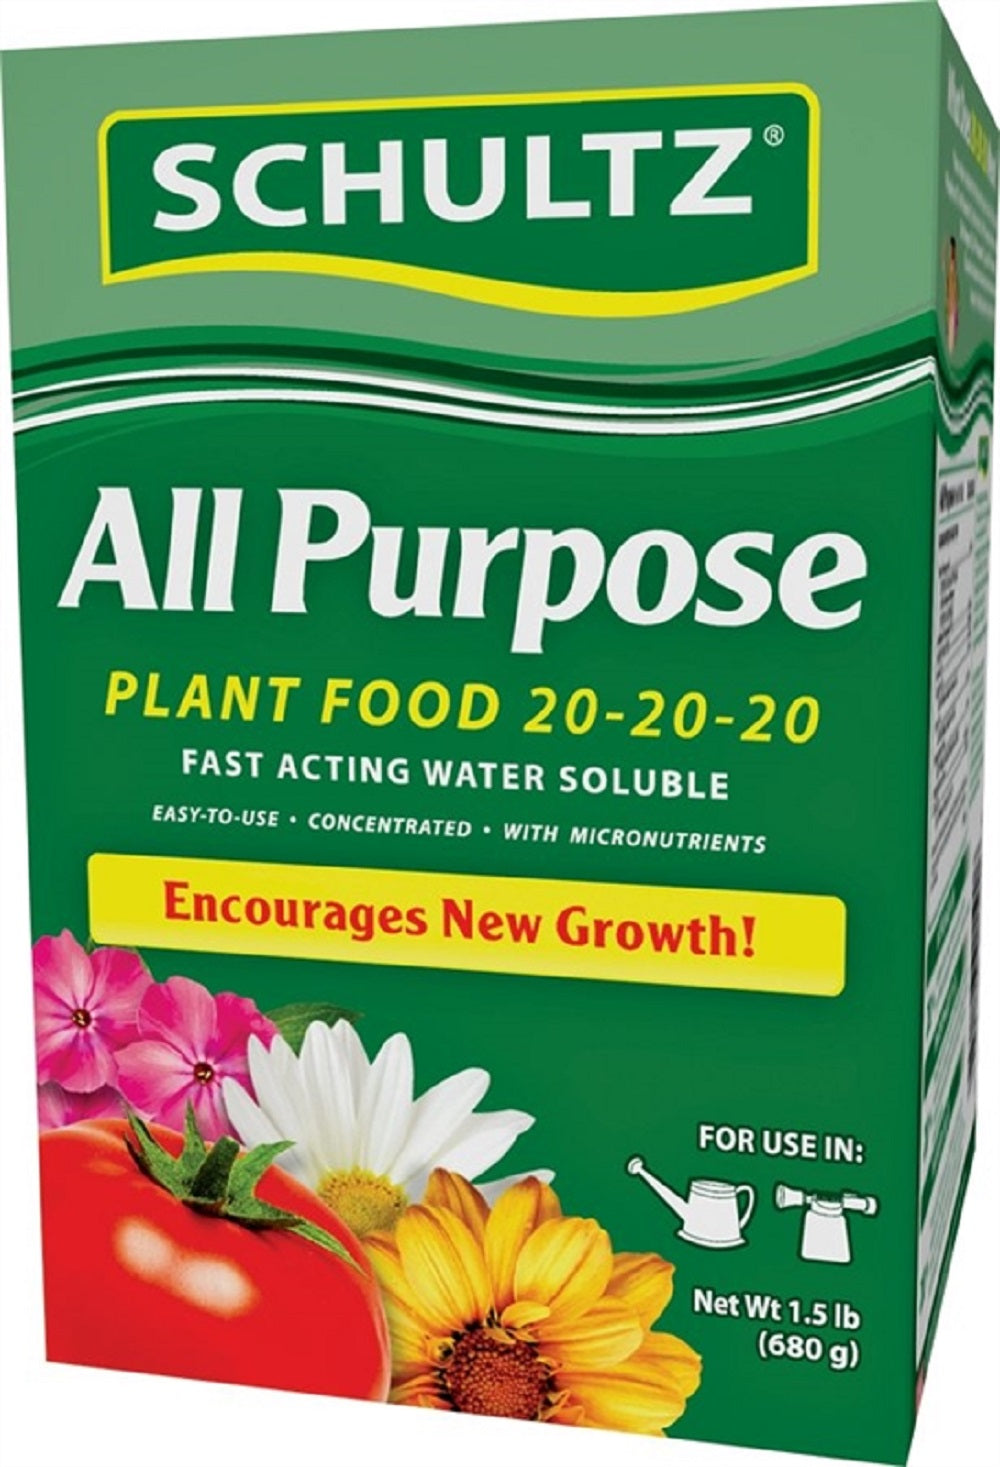 Schultz SPF70680 All Purpose Water Soluble Plant Food, 20-20-20, 1.5 Lbs